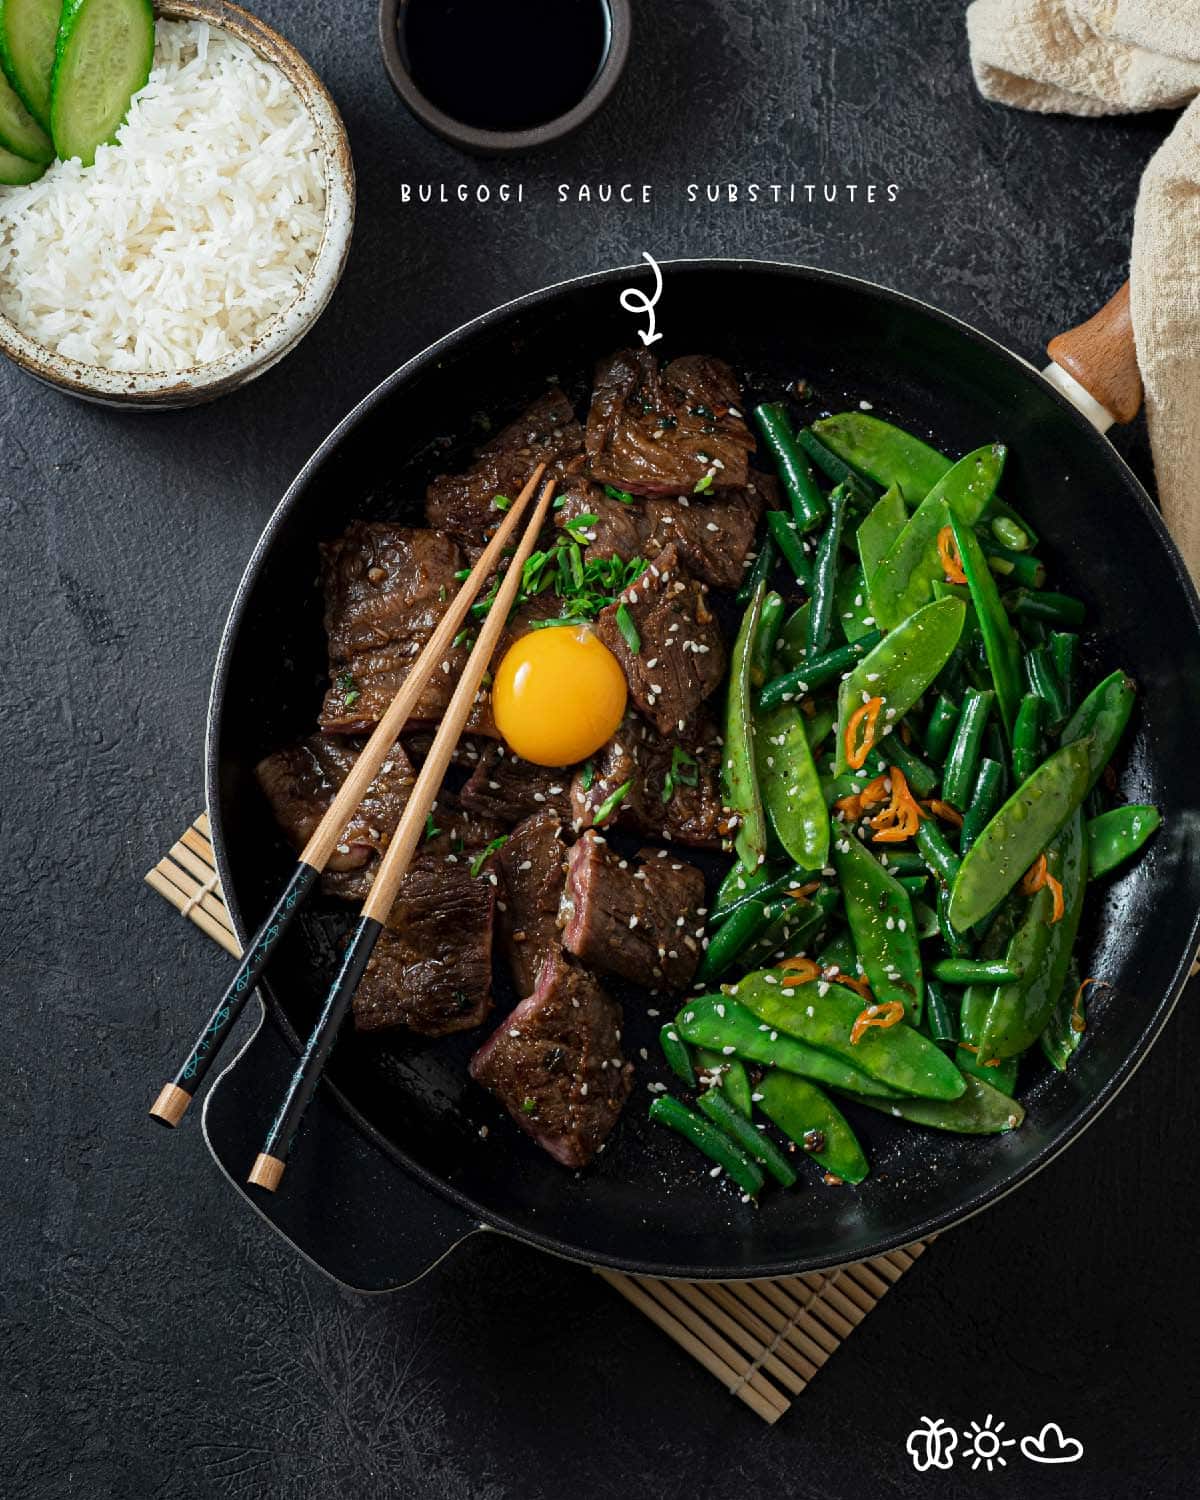 Looking for a delicious and easy bulgogi sauce substitute? Look no further! This surprising option is quick and easy to prepare, and will blow your mind with its amazing flavor.